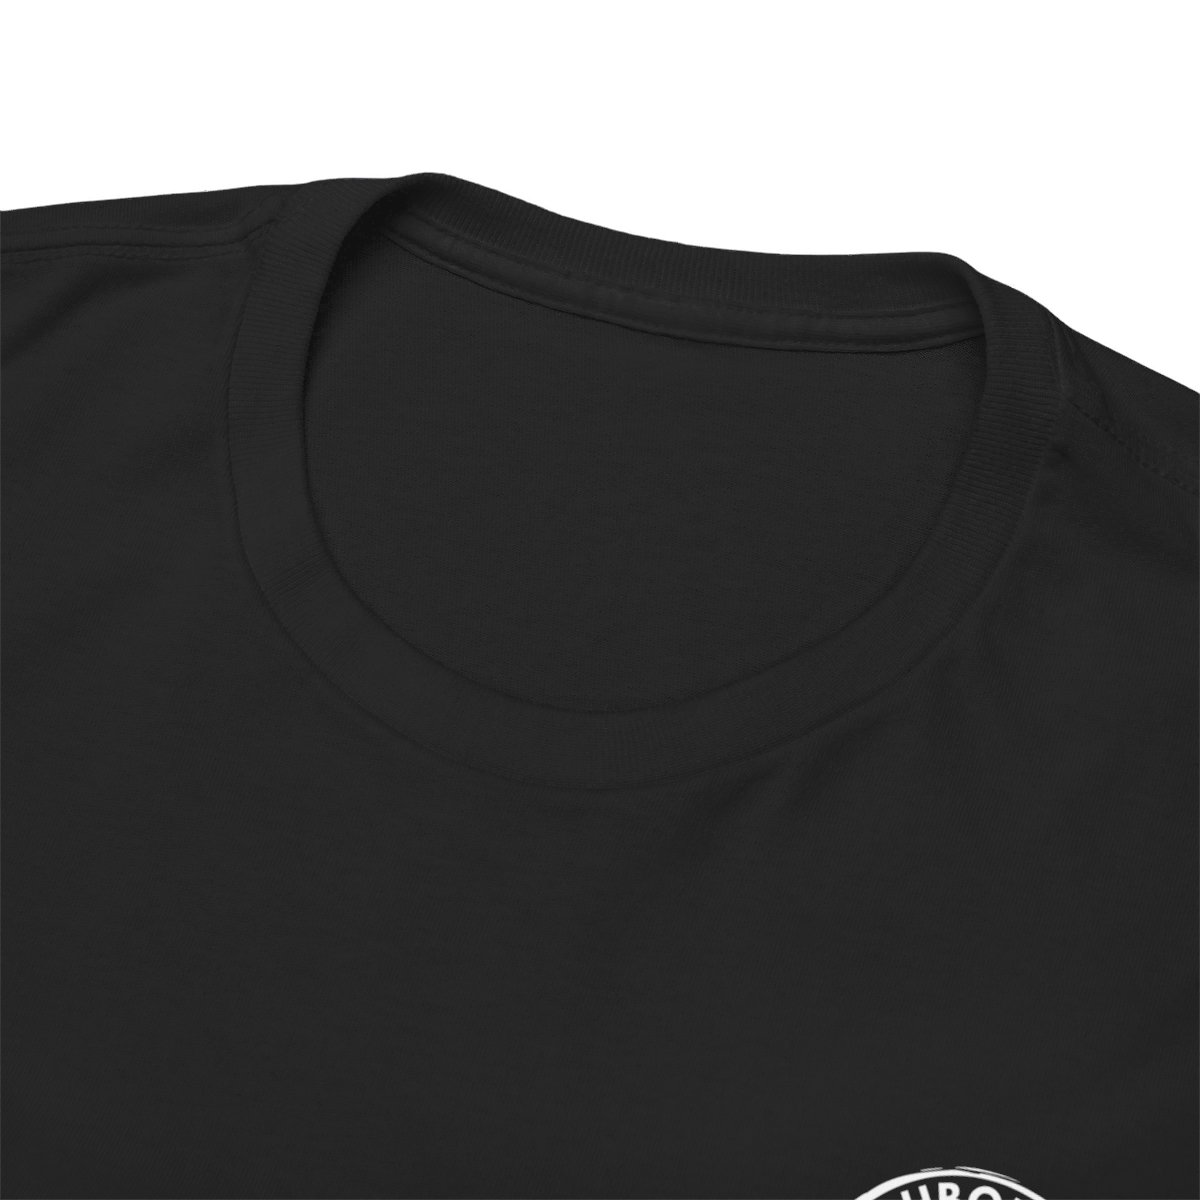 Drop In HxC Cotton Tee product thumbnail image